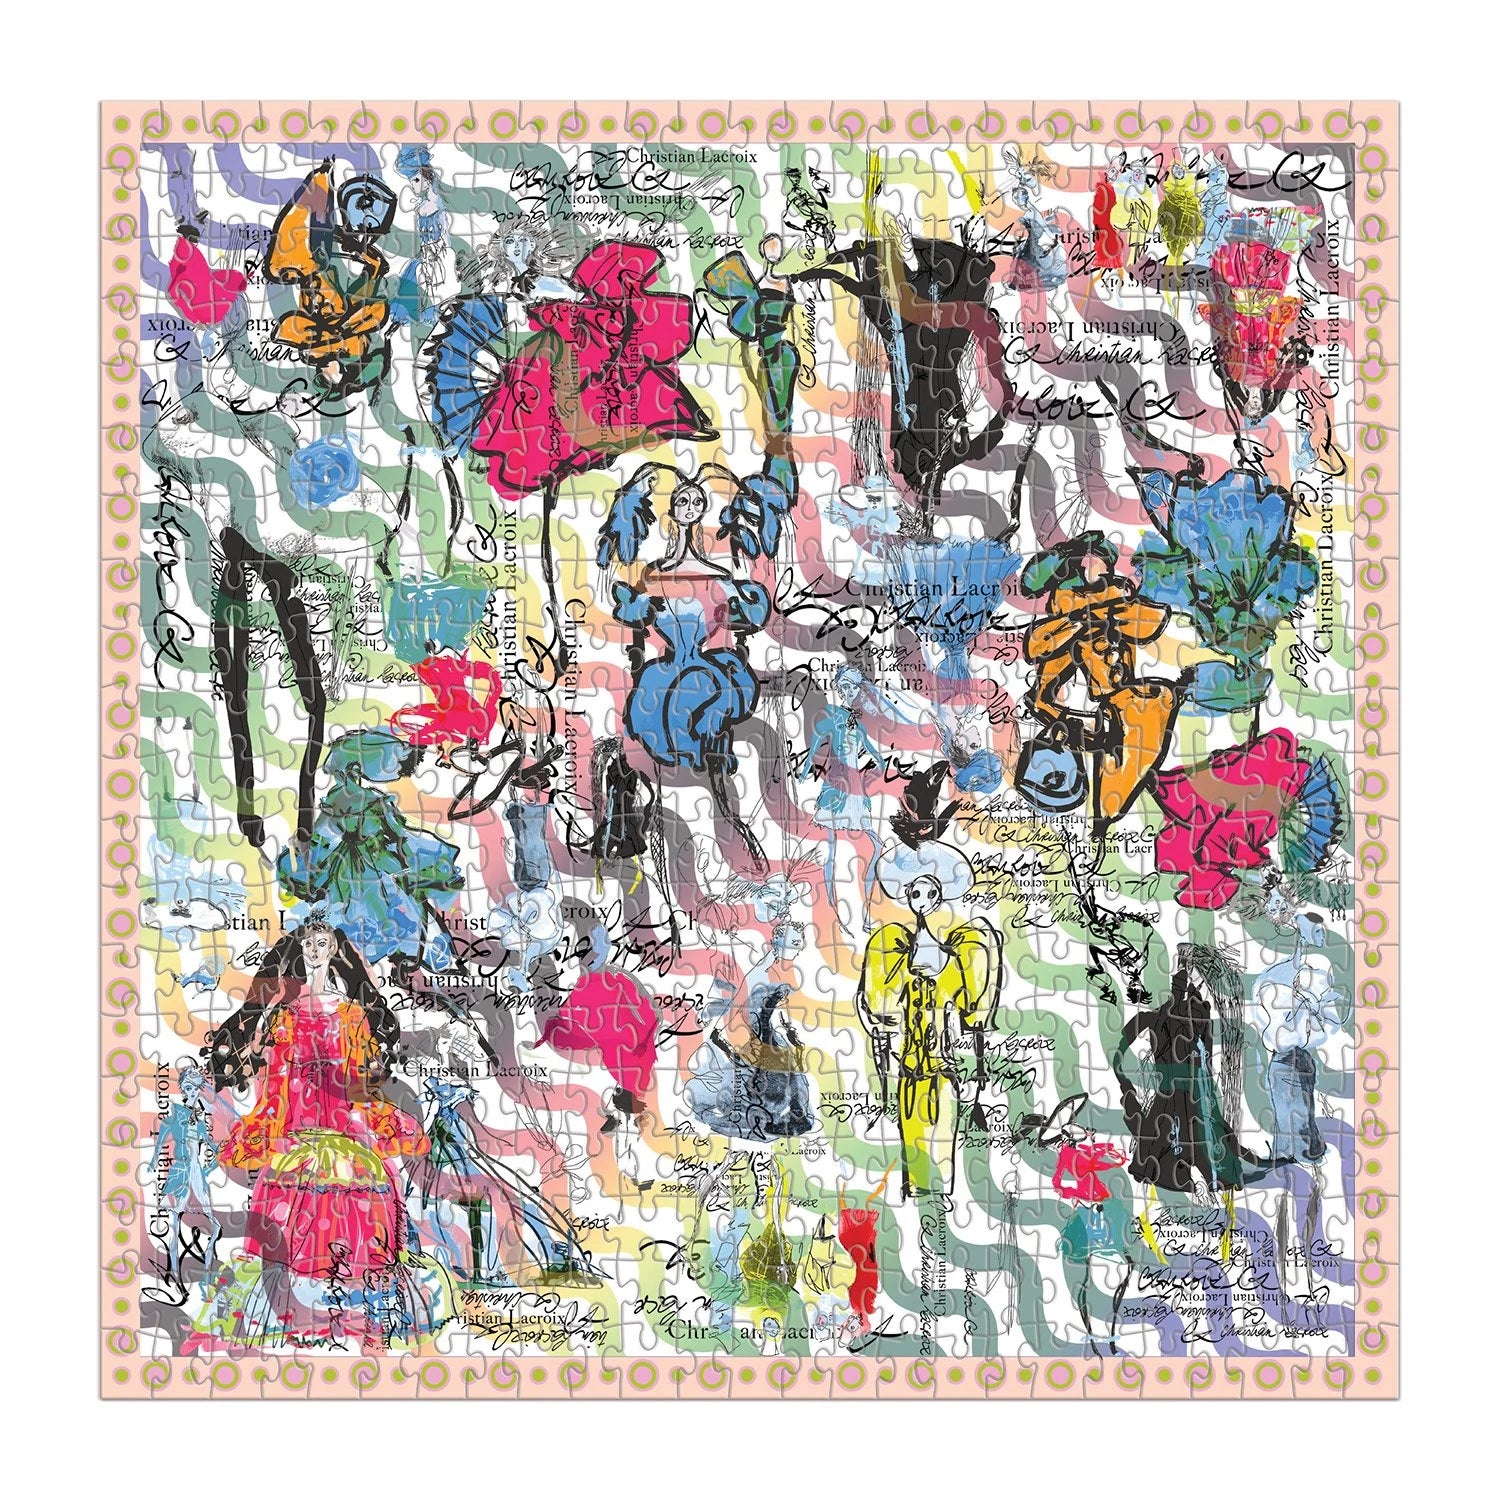 Ipanema Girl - Christian Lacroix, Double-Sided Puzzle (500 pieces)